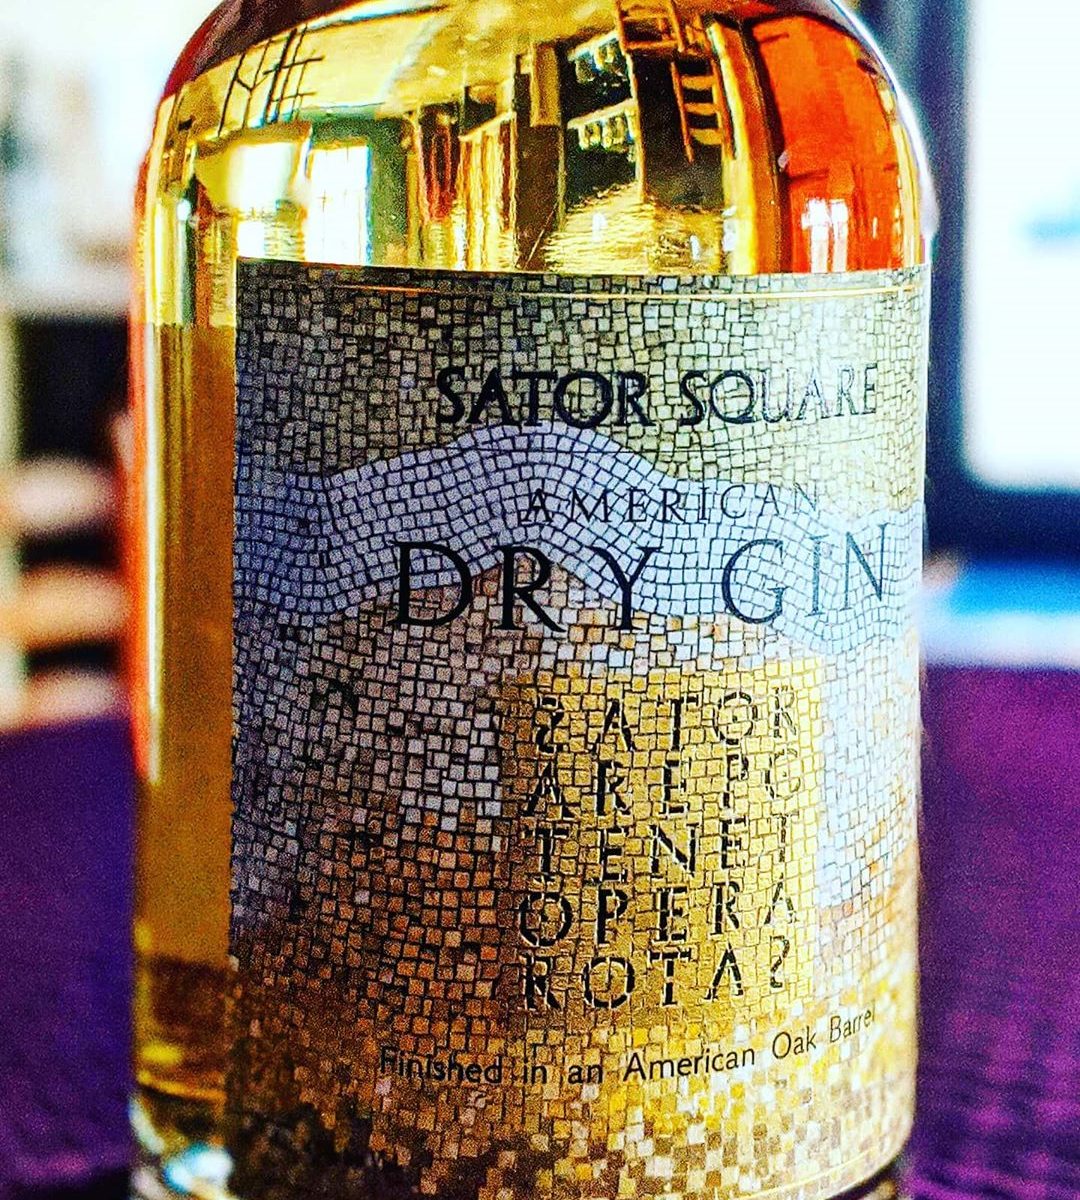 Sator Square Dry Gin - Barrel Rested